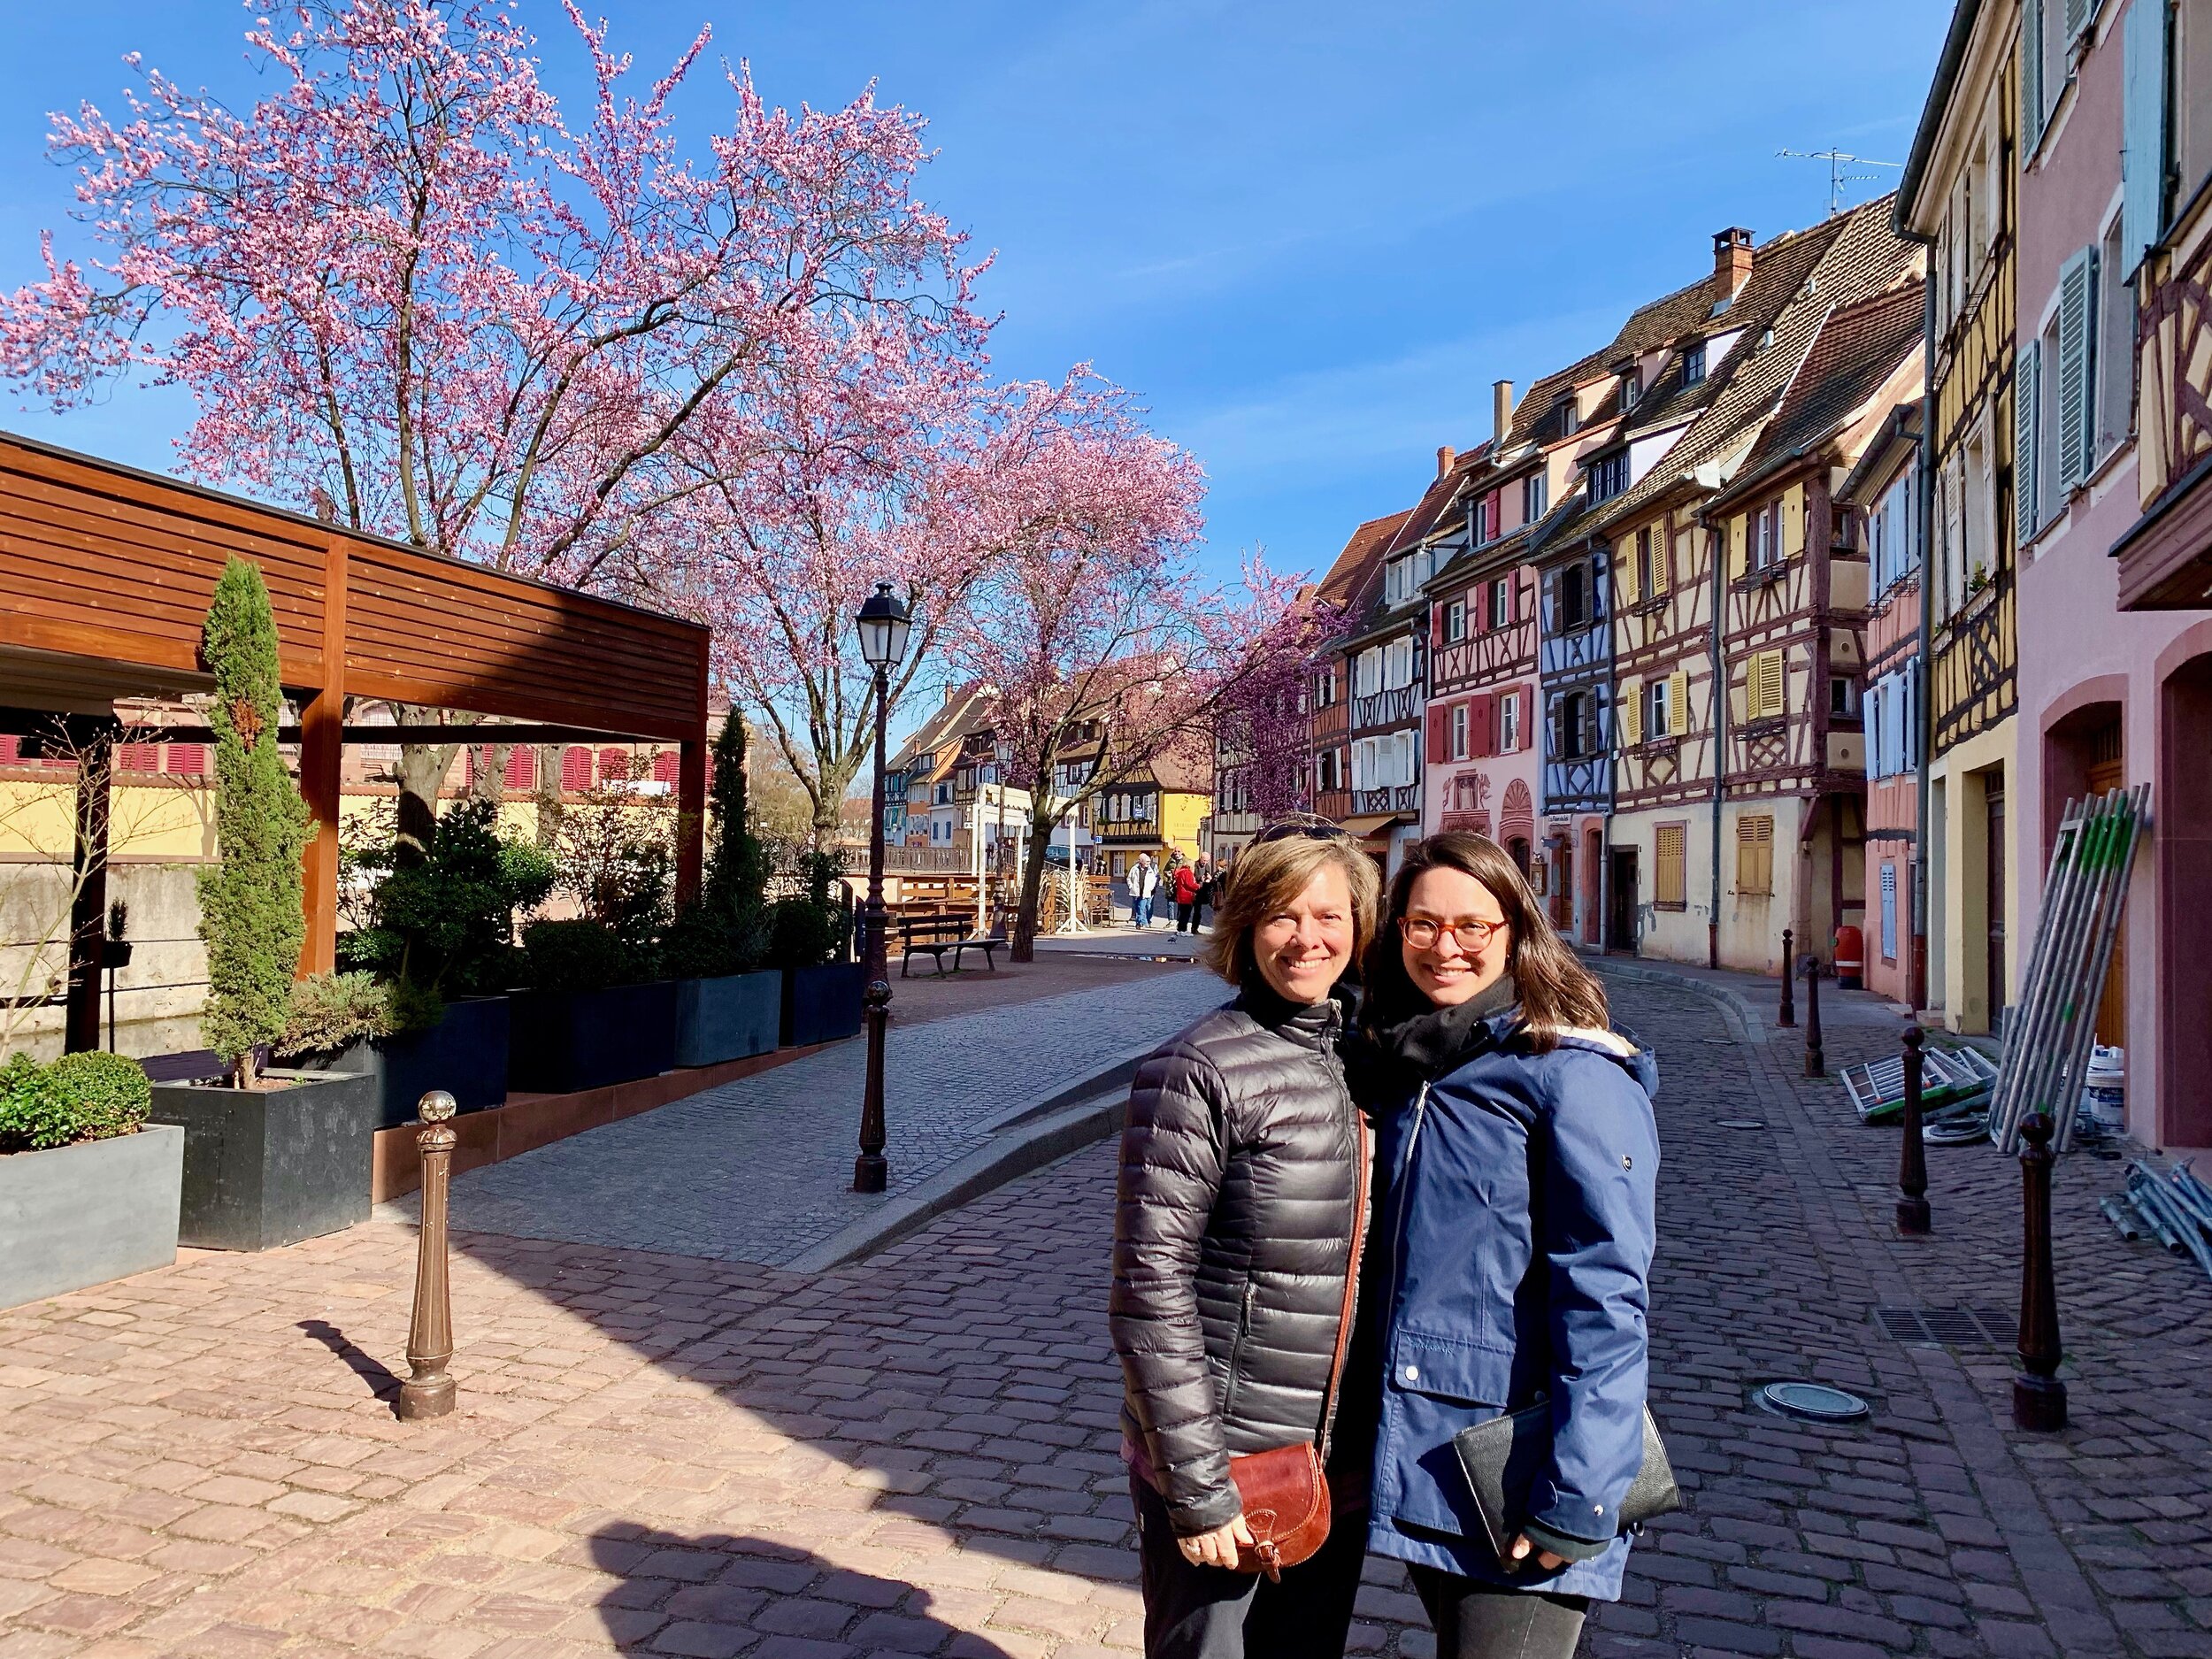 A Wonderful 3 Day Itinerary in Alsace